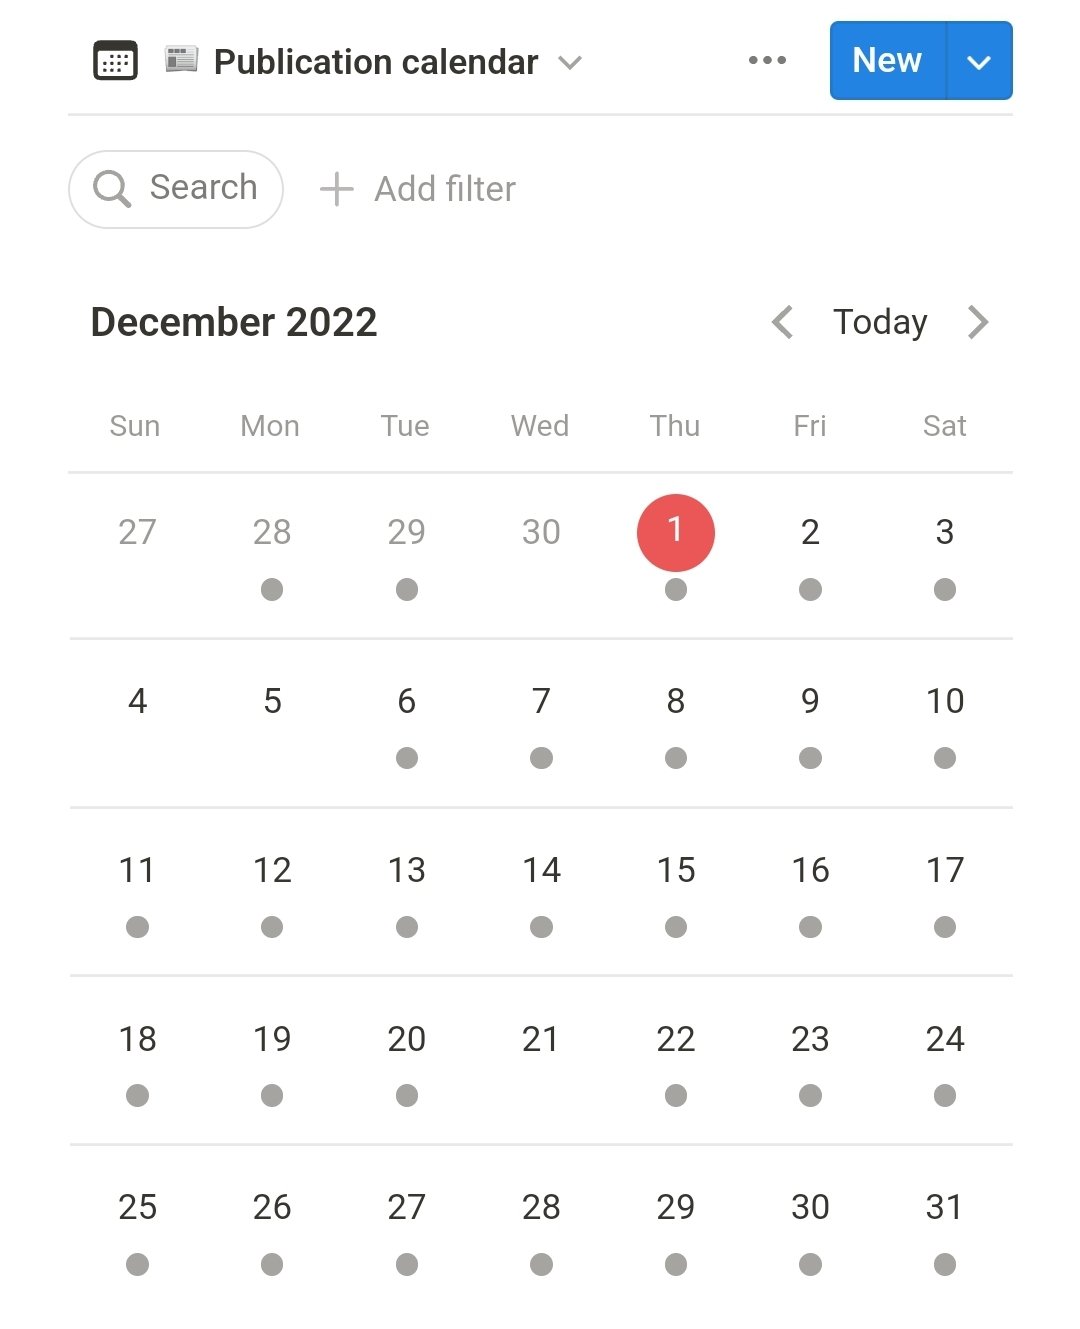 ADHD blog publication calendar on Notion. Days only show gray dots.